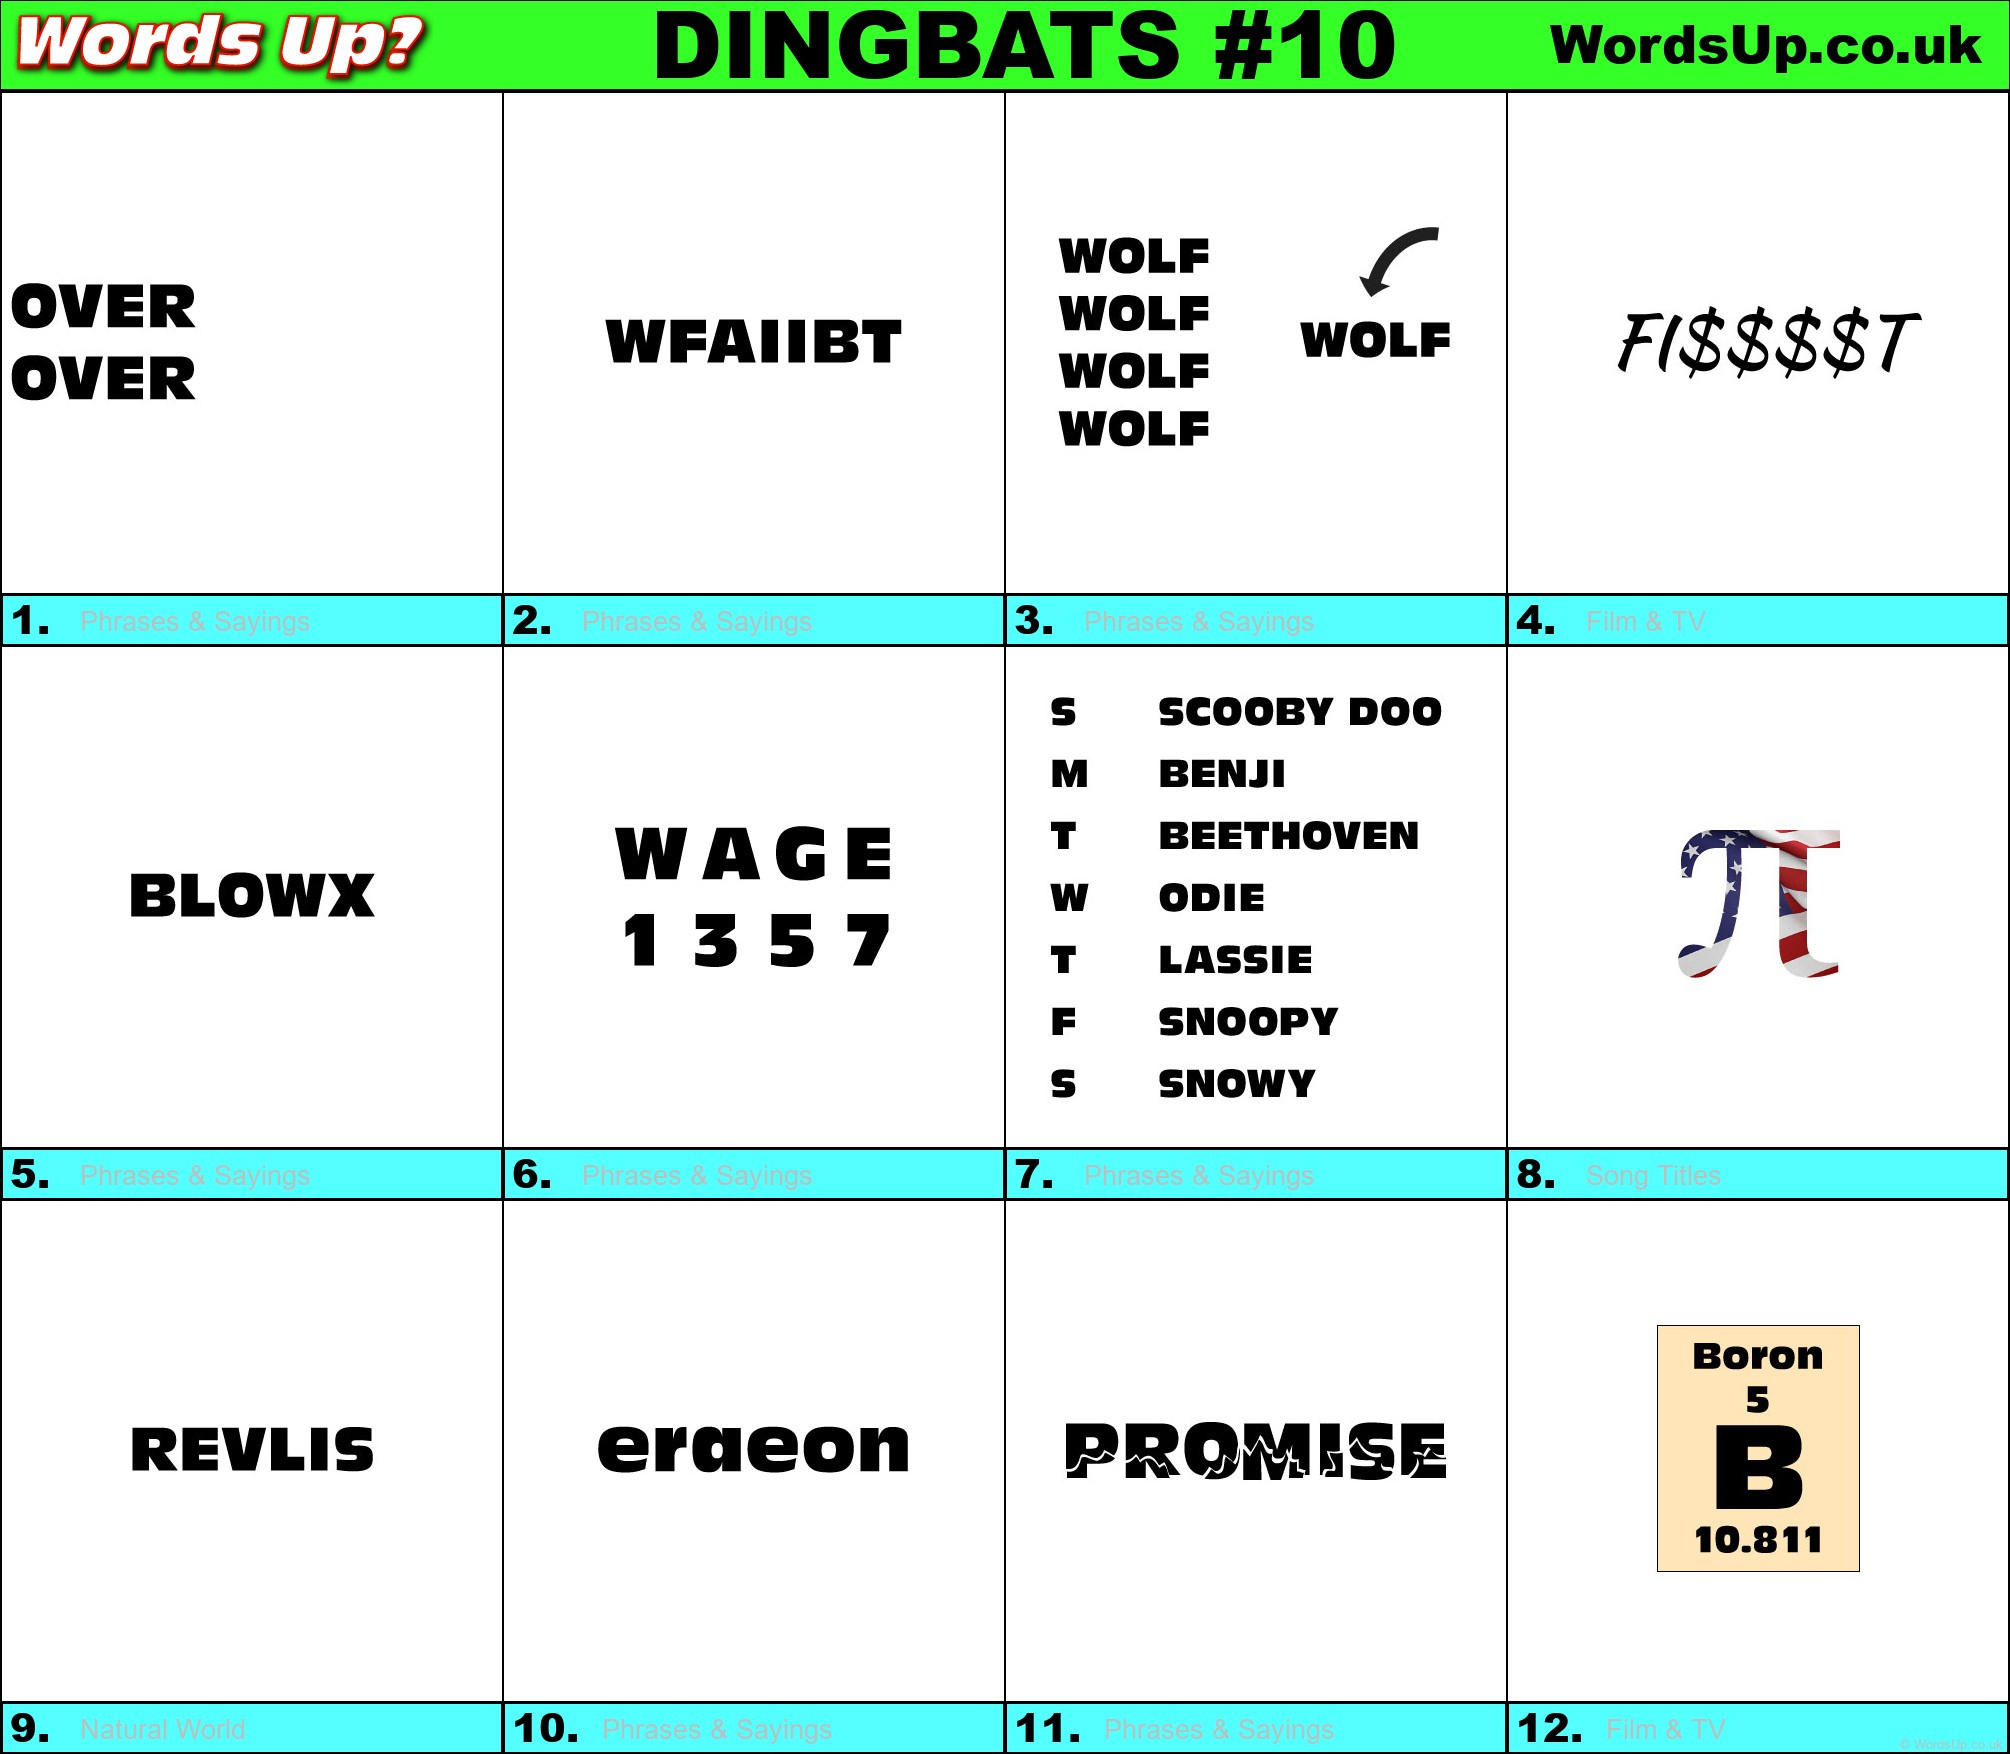 Dingbats Quiz 10 Find The Answers To Over 710 Dingbats Words Up Games